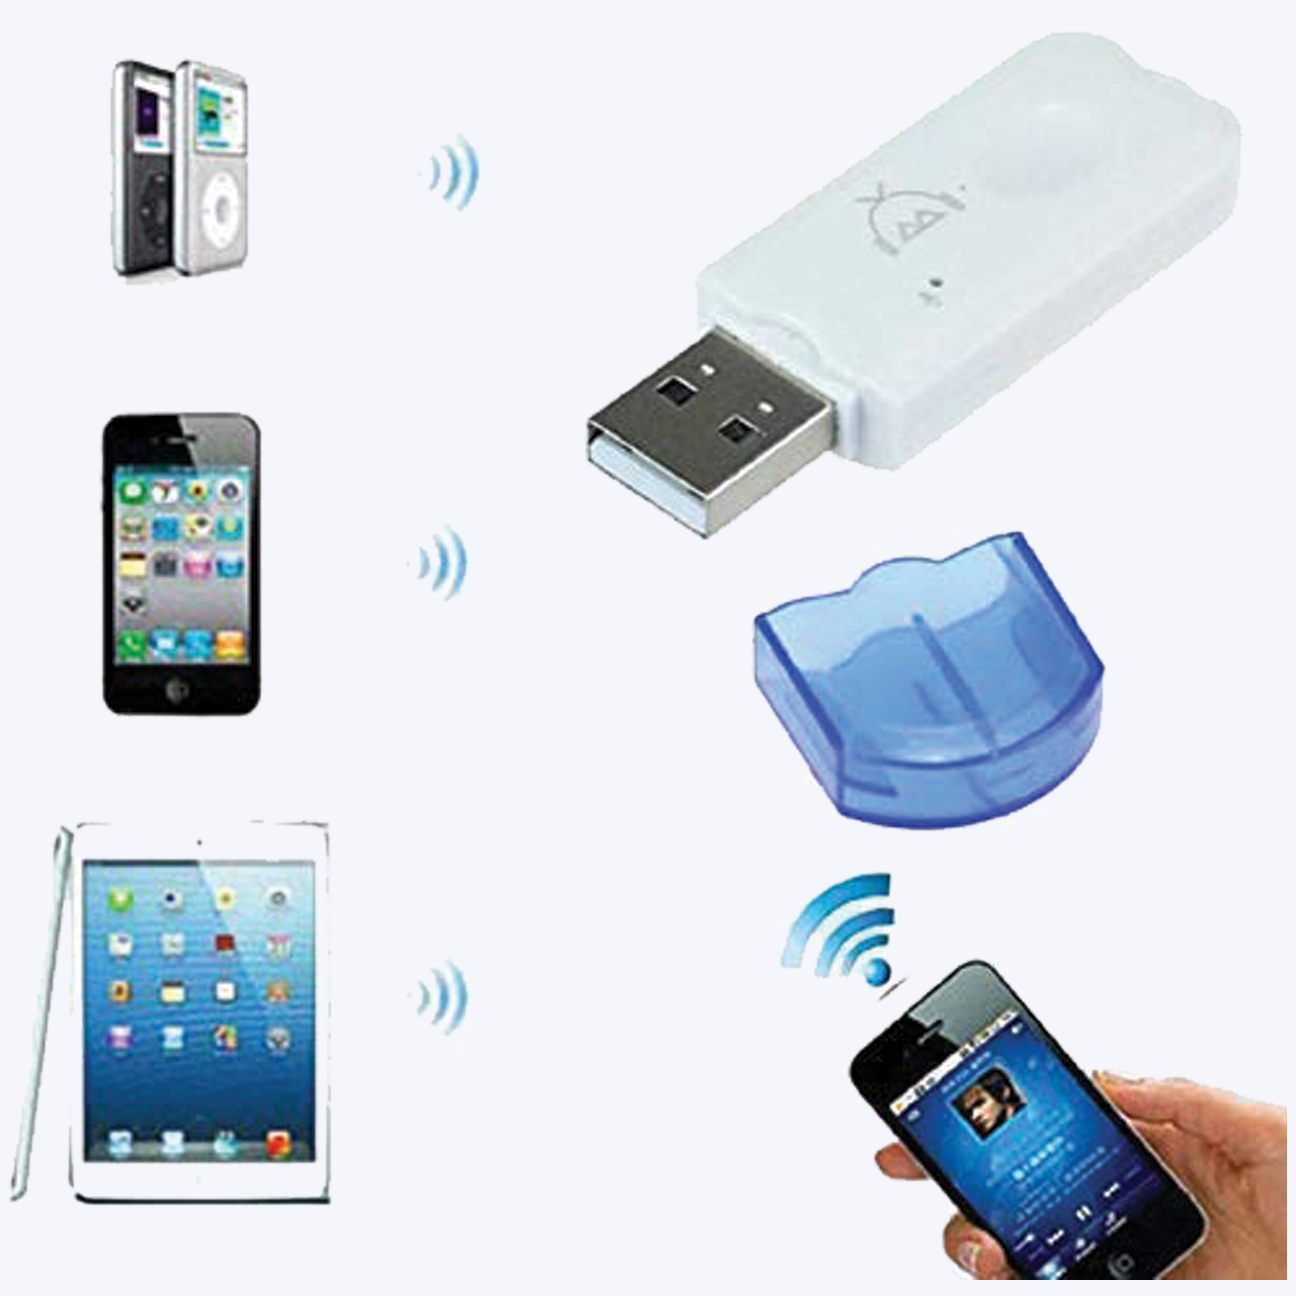 USB Dongle Bluetooth Receiver